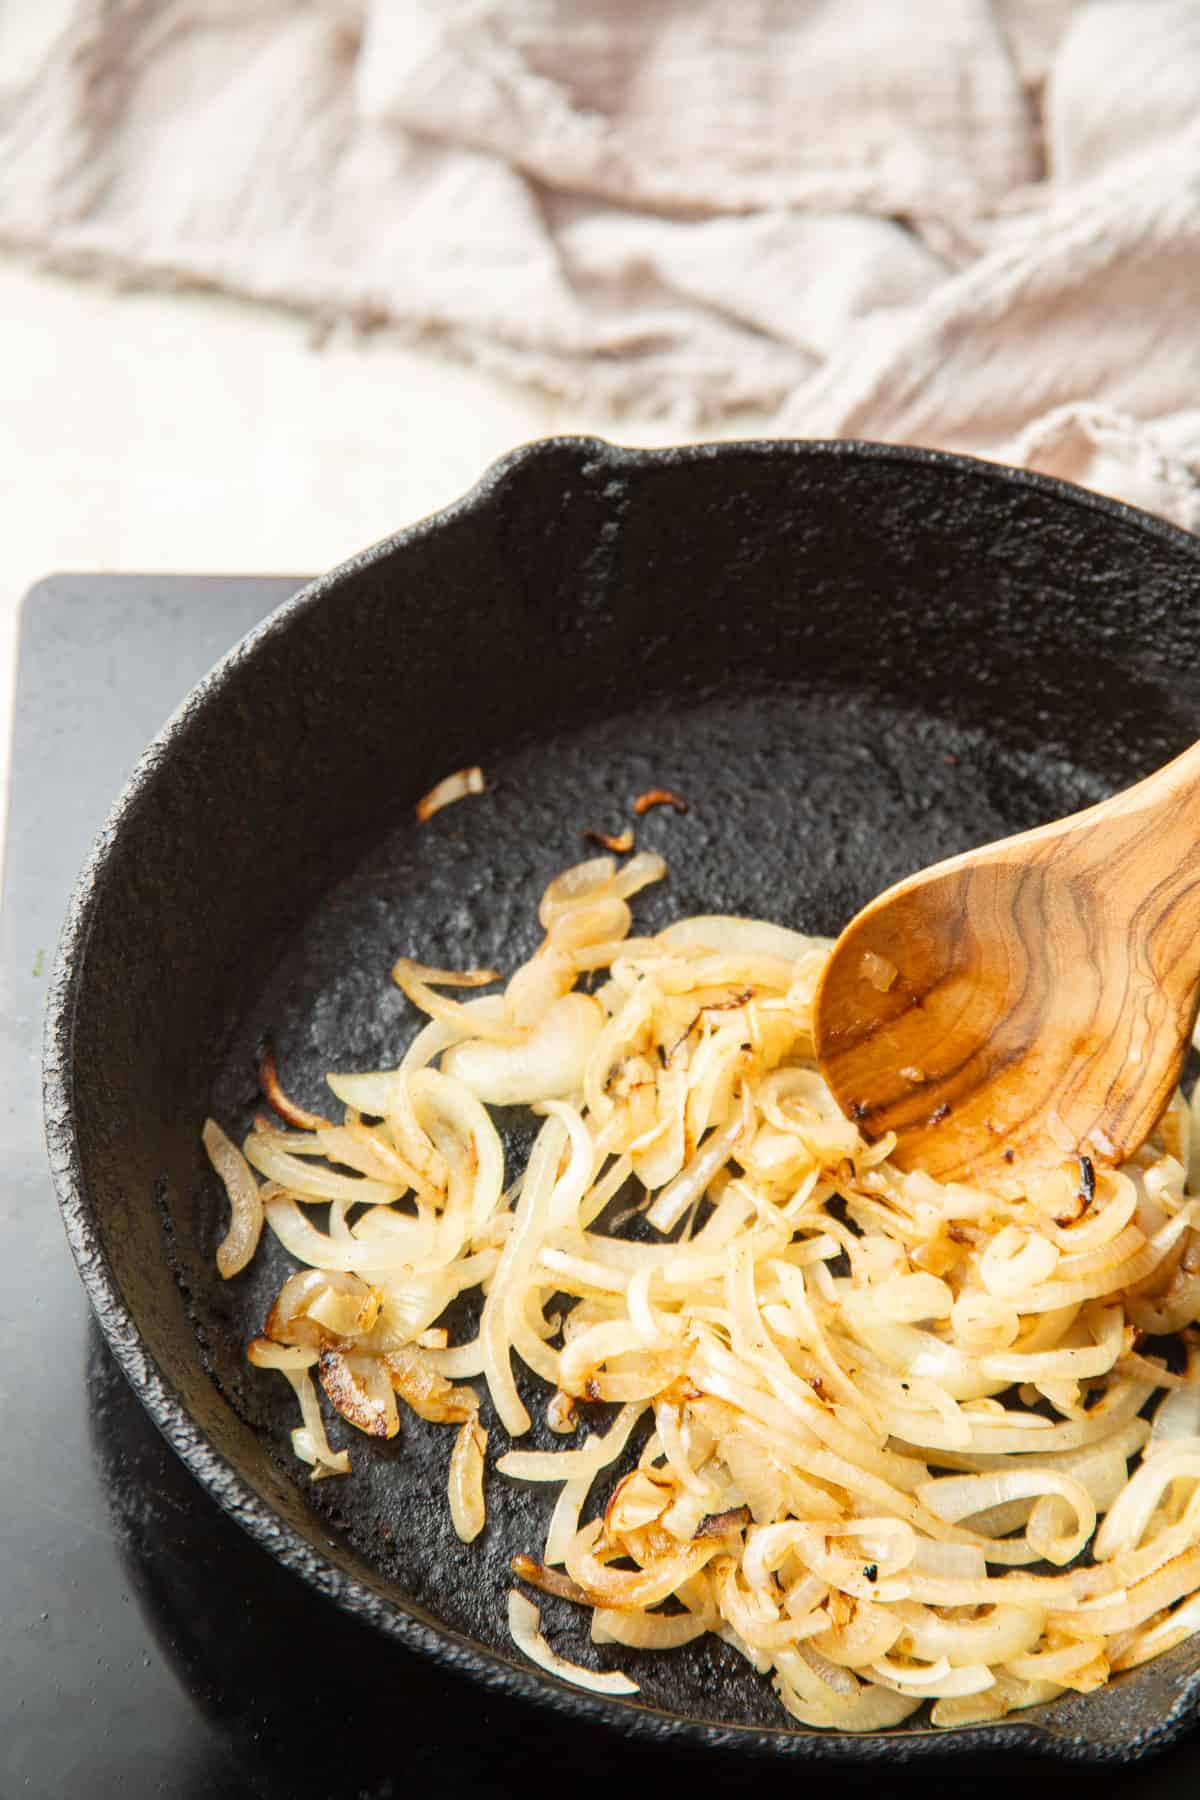 Onion strips browning in a skillet.